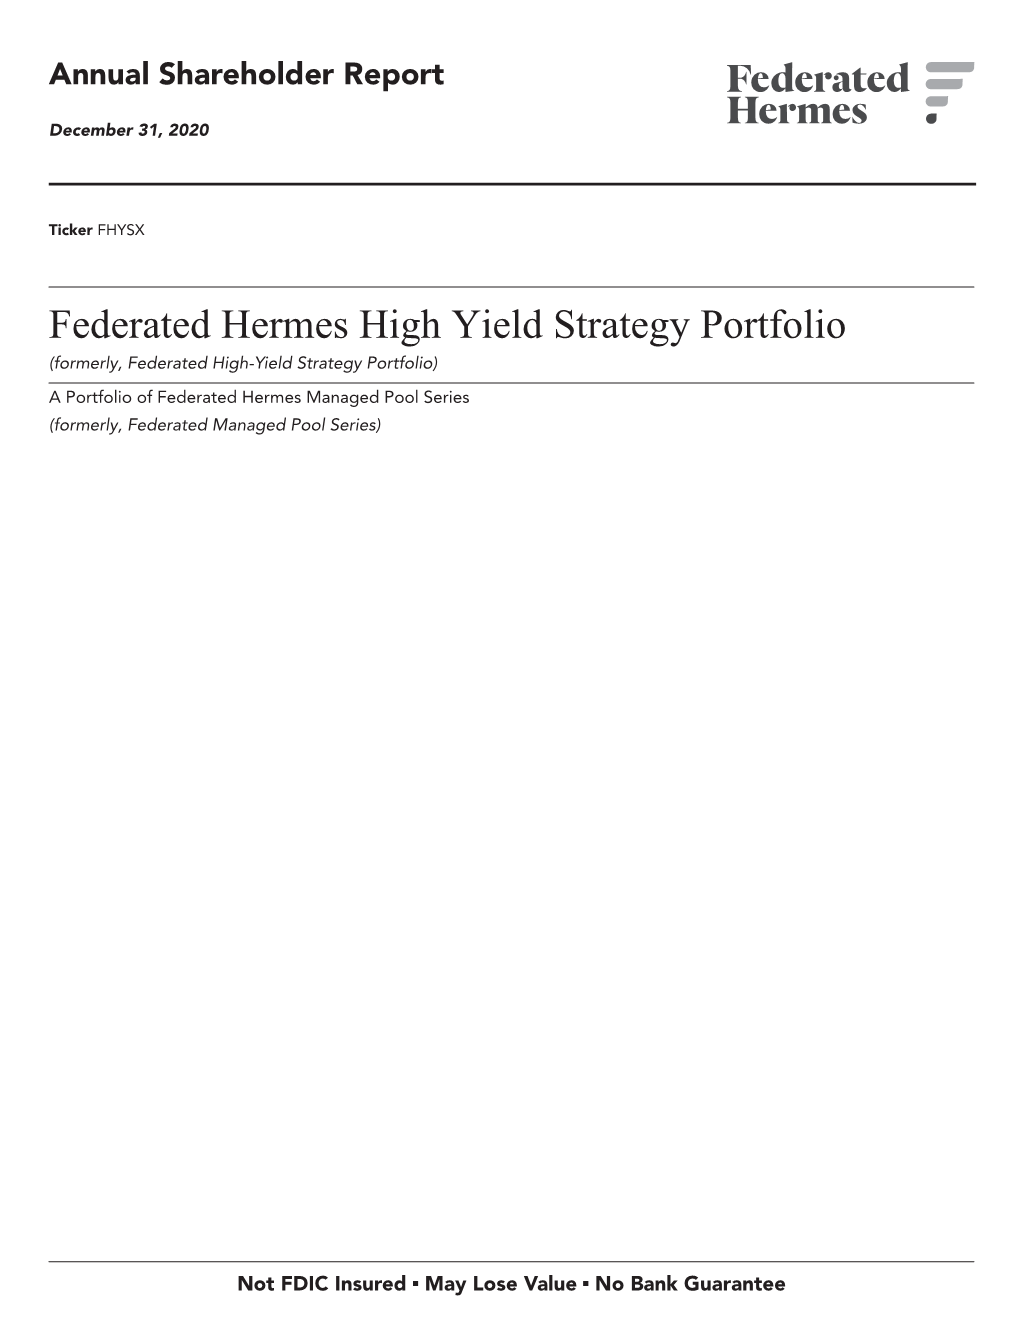 High-Yield Strategy Portfolio) a Portfolio of Federated Hermes Managed Pool Series (Formerly, Federated Managed Pool Series)